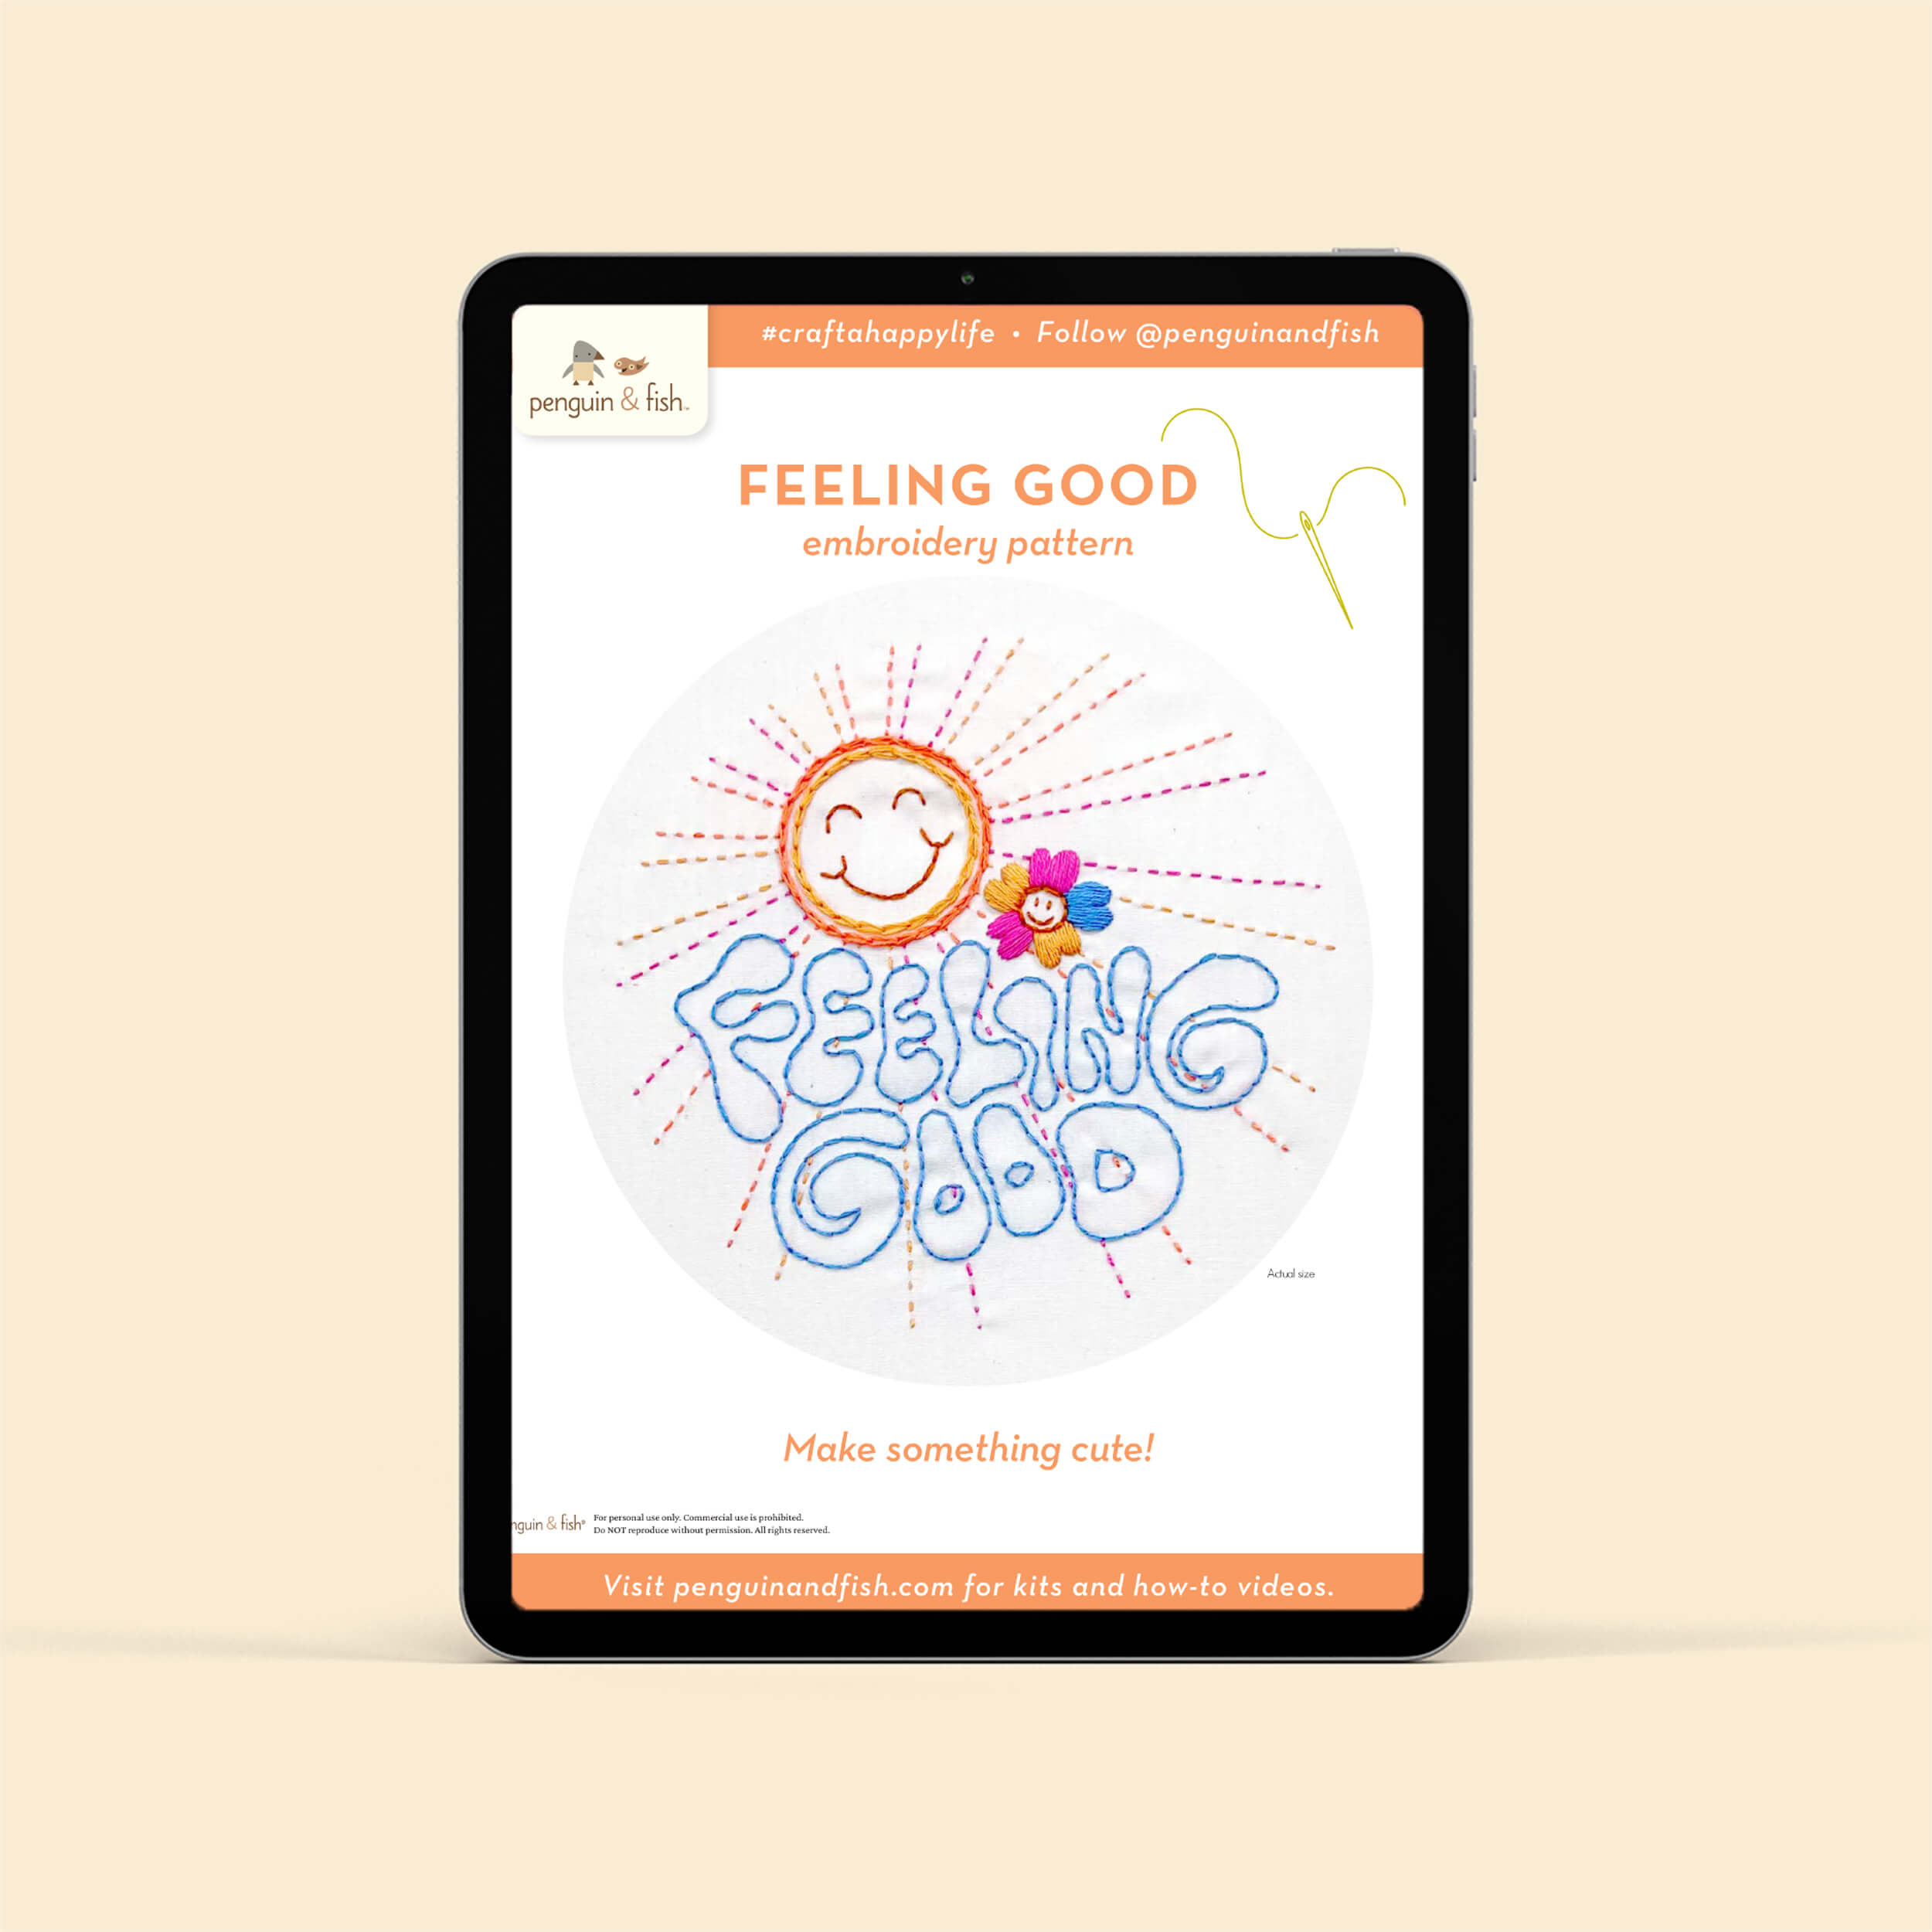 Feeling Good PDF embroidery pattern shown on a tablet